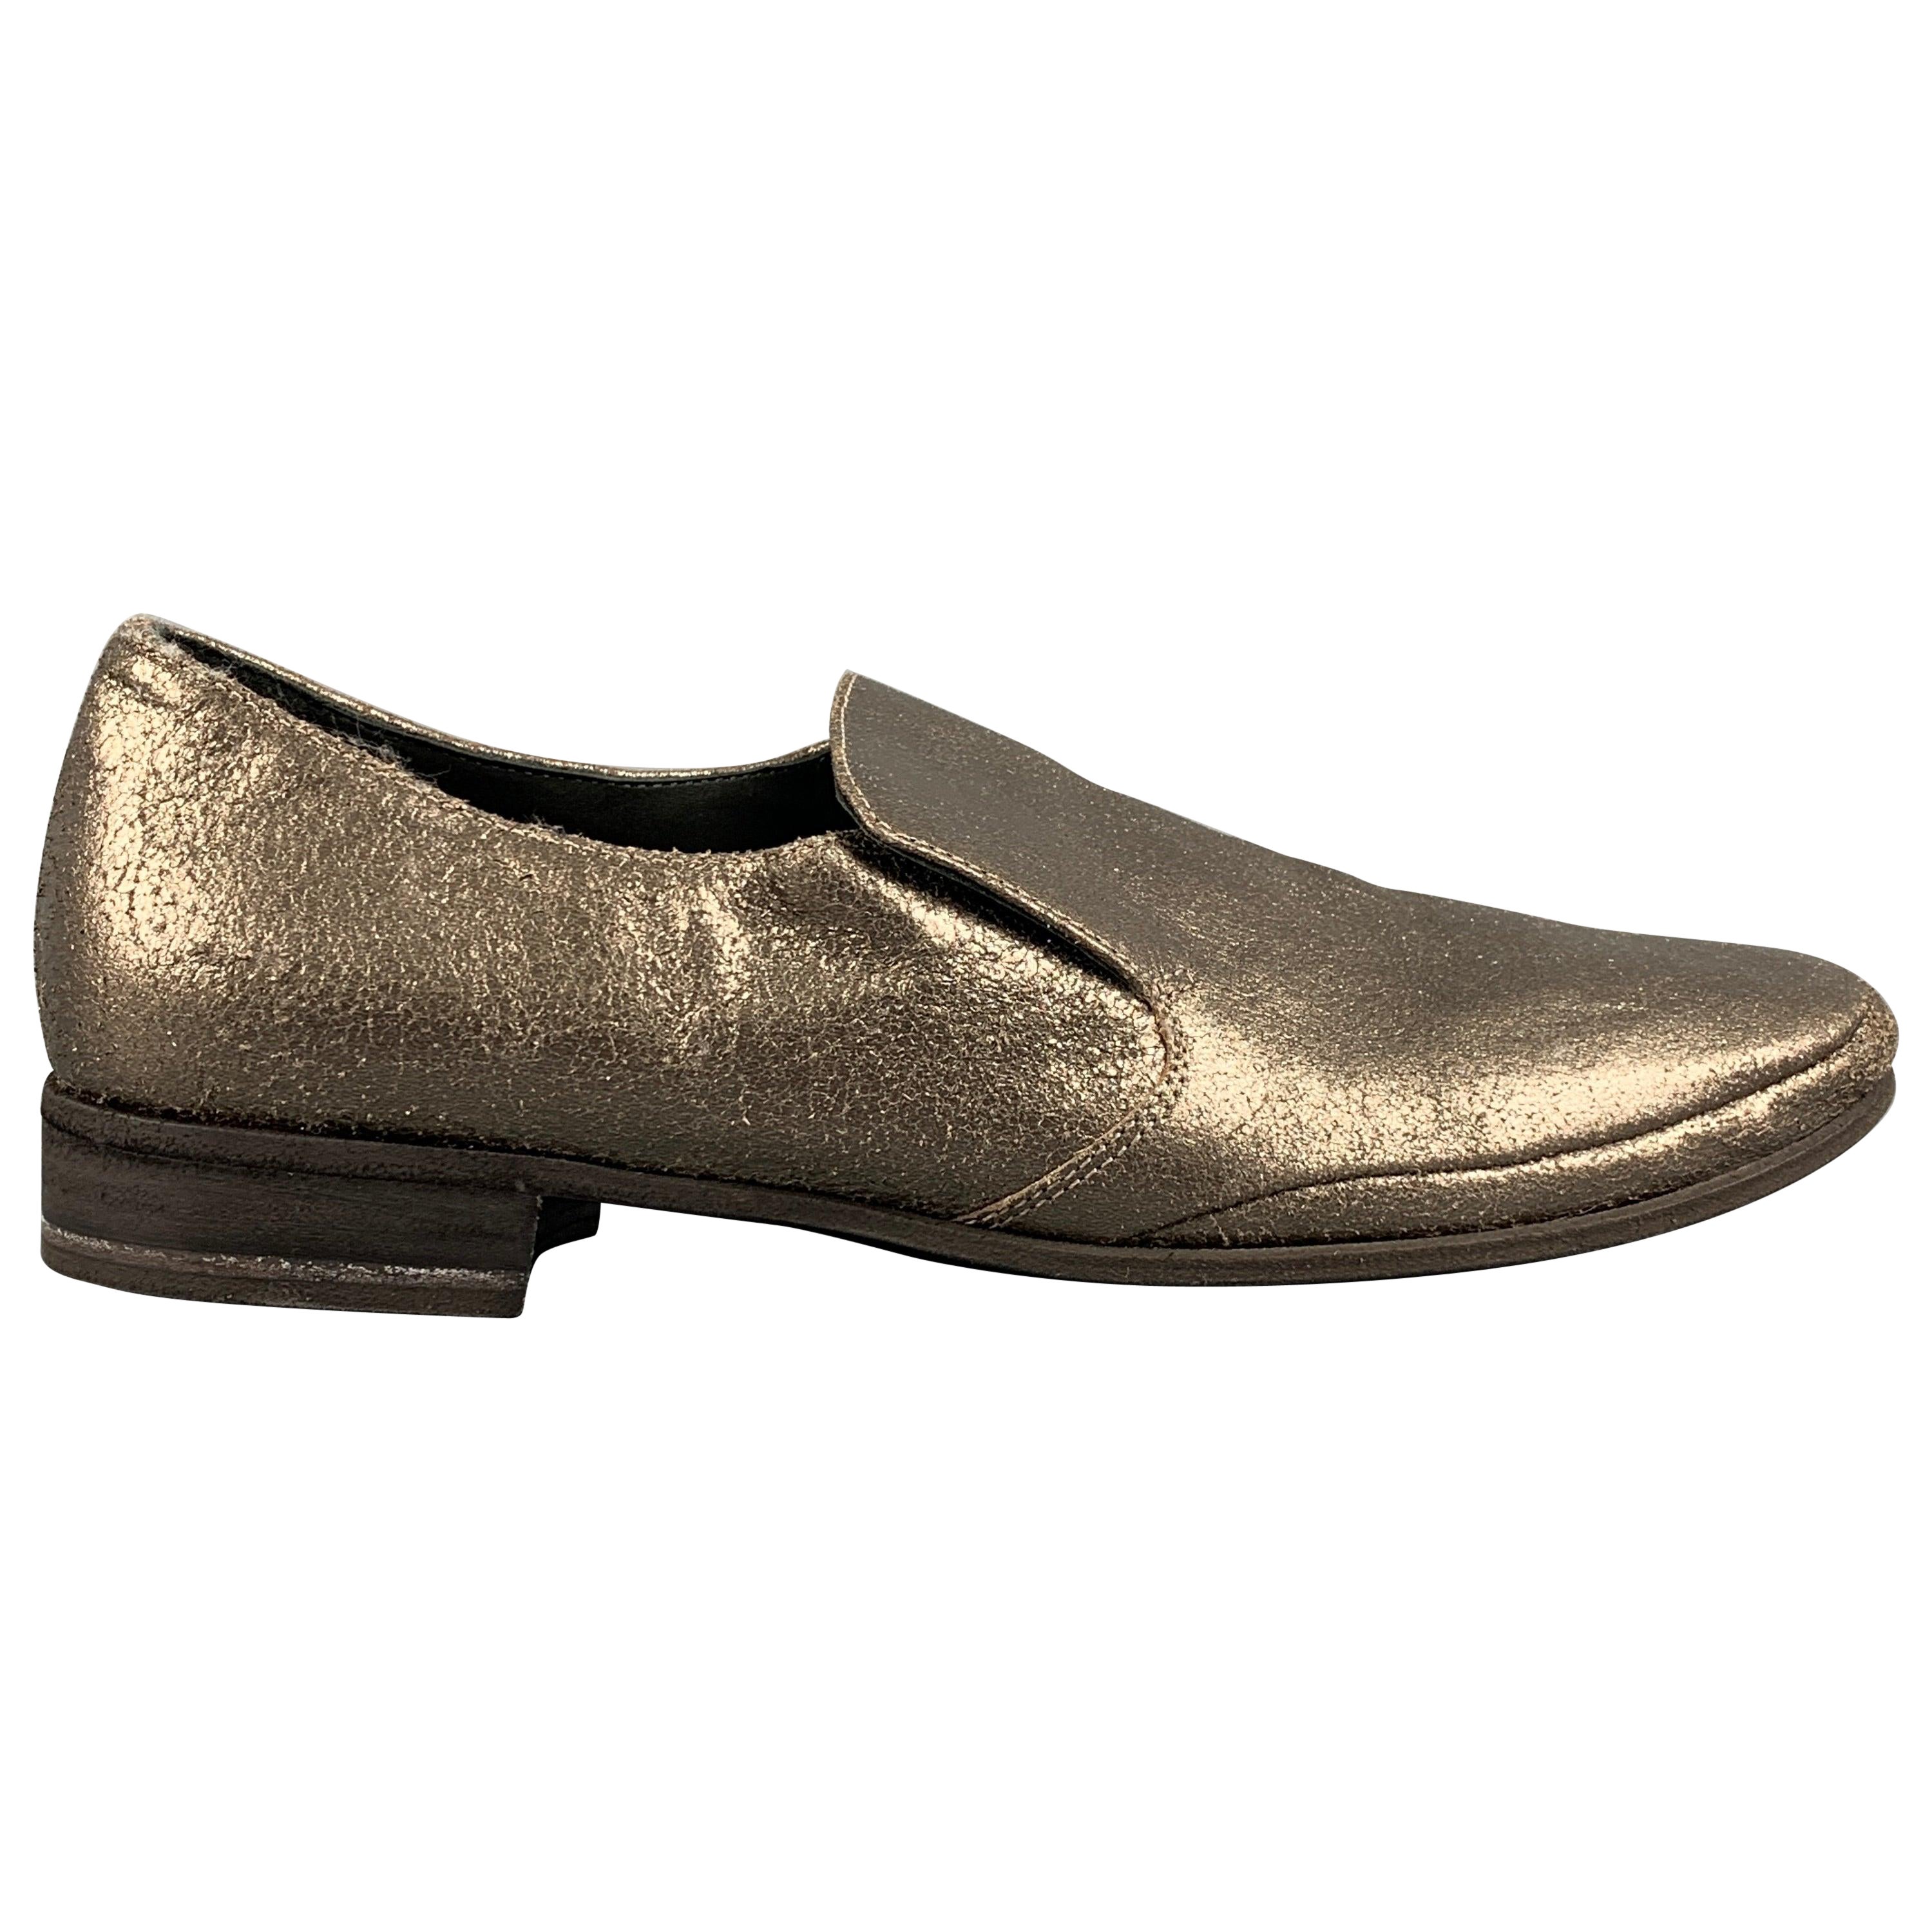 BRUNELLO CUCINELLI Size 7 Silver Leather Crackled Loafer Flats For Sale